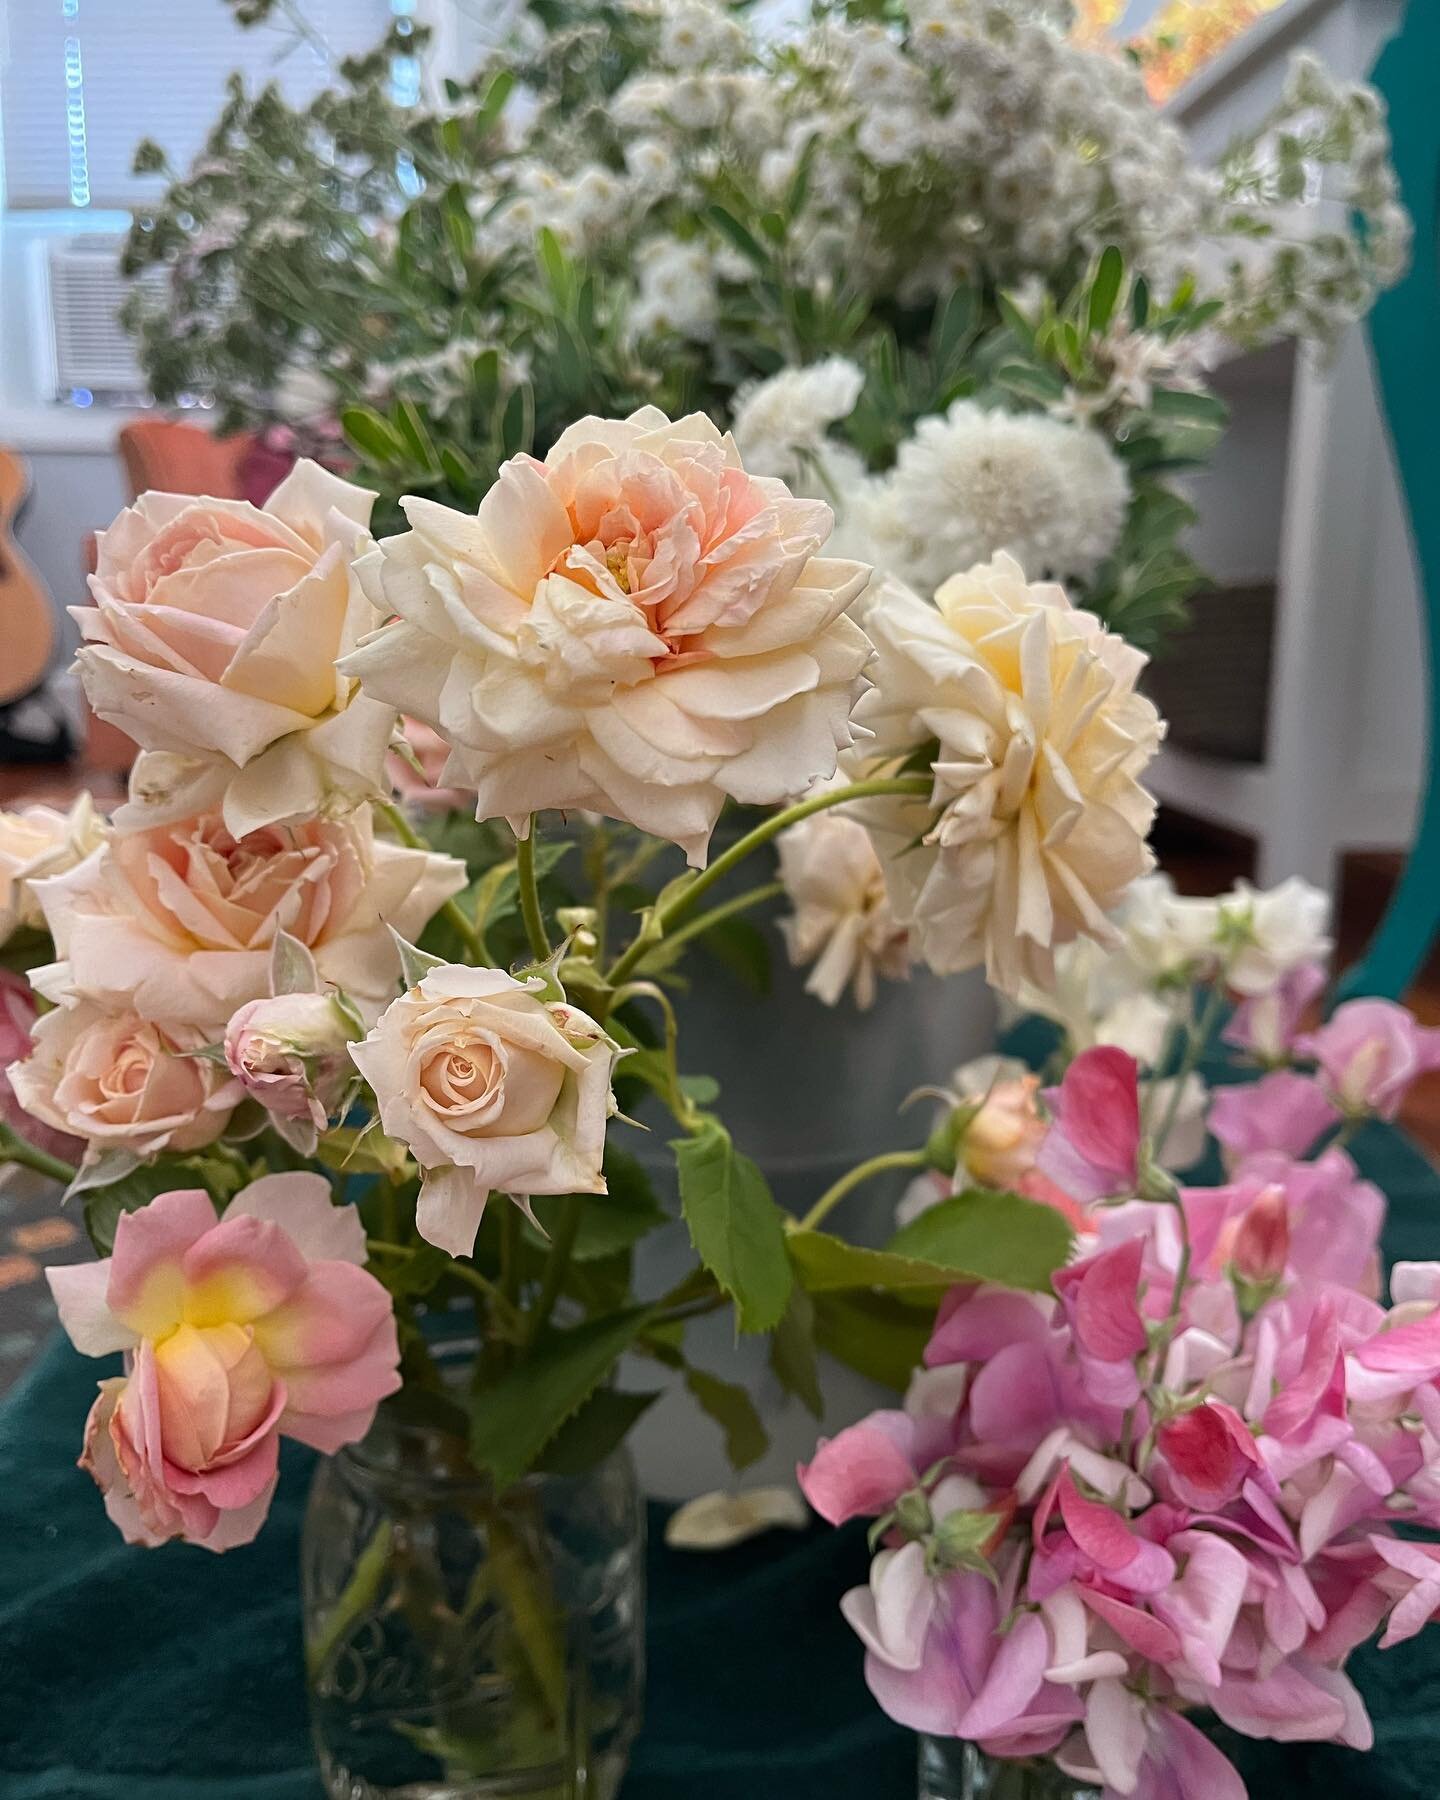 Completed my first wholesale order today - for a florist prepping for a beautiful wedding happening this weekend. Pictured here: queen of hearts sweet peas, fun in the sun roses and state of Grace roses, double feverfew, summer Daphne, white yarrow, 